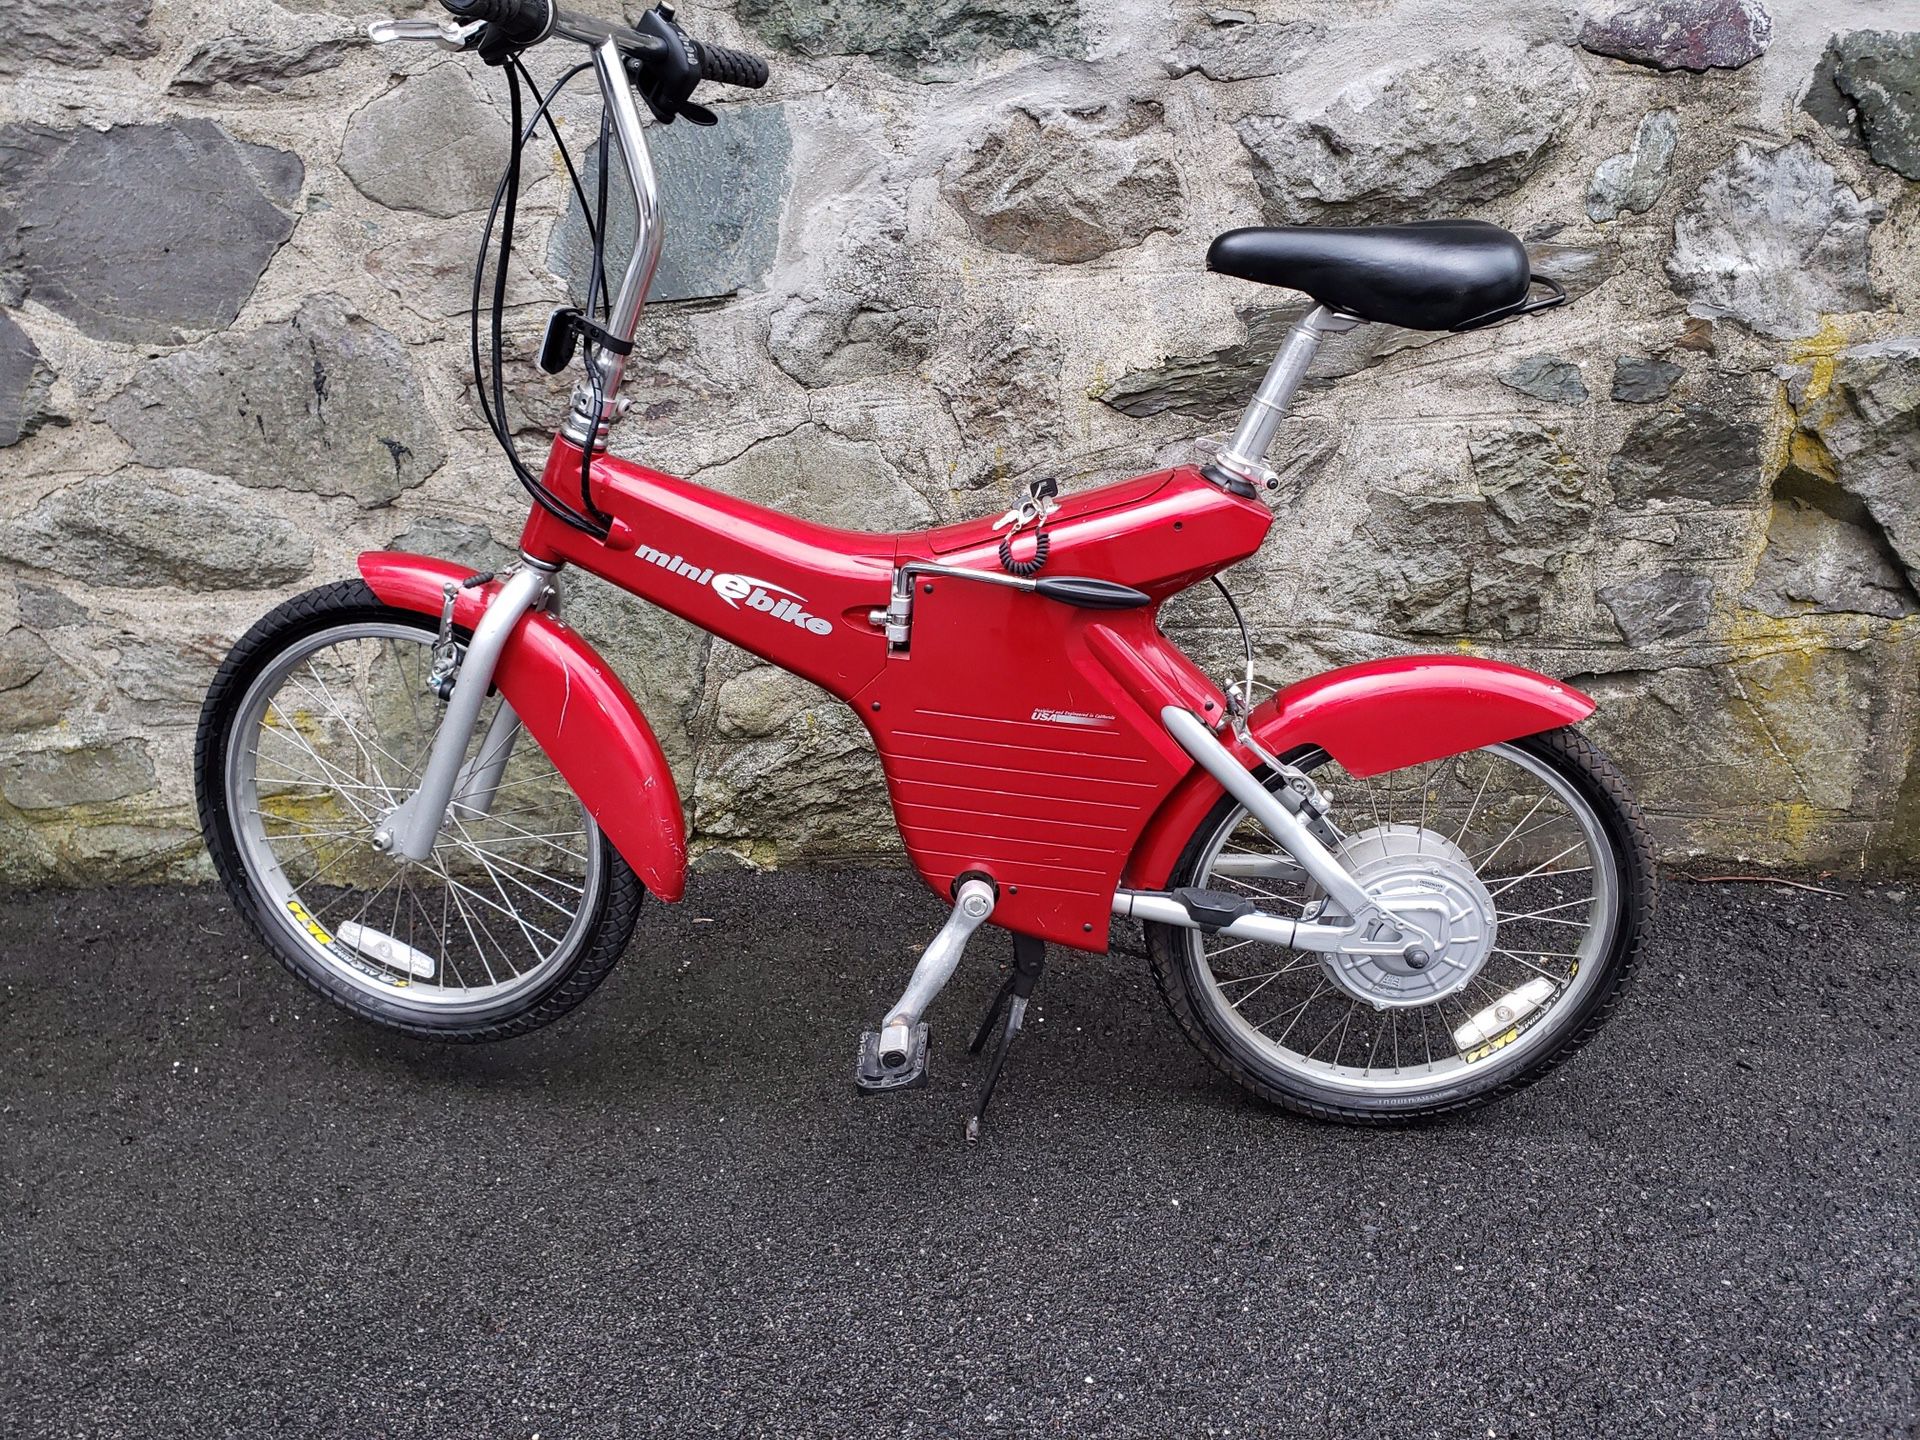 Limited Edition LEE IACOCCA Mini Folding Electric Bike. Very Rare. Works great!—